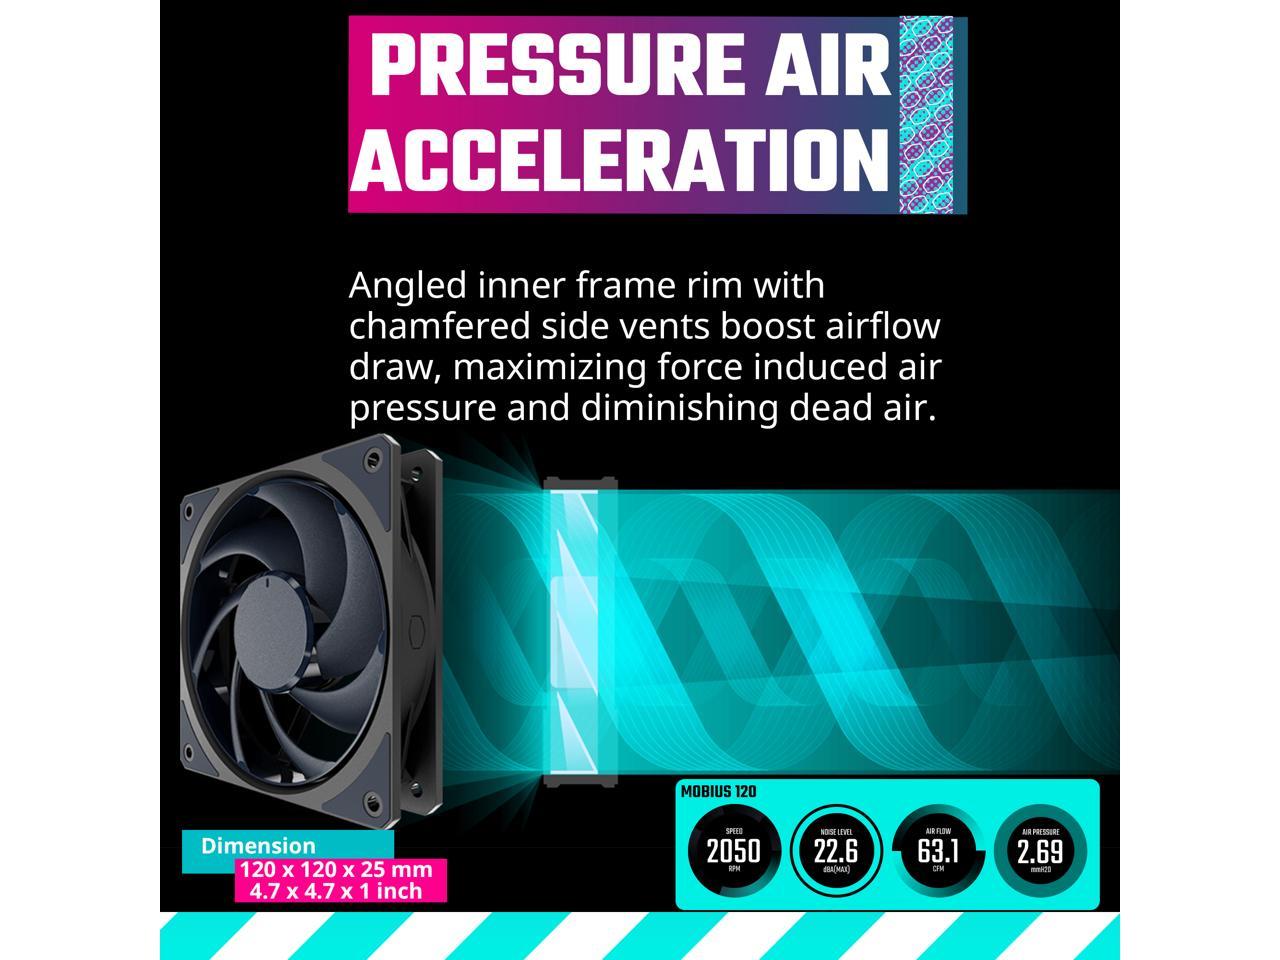 Cooler Master Mobius 120 Ring Blade Fan, Interconnecting Blades, Loop Dynamic Bearing, Anti-Sway System, 2050rpm PWM Control for Computer Case, CPU Liquid and Air Cooler